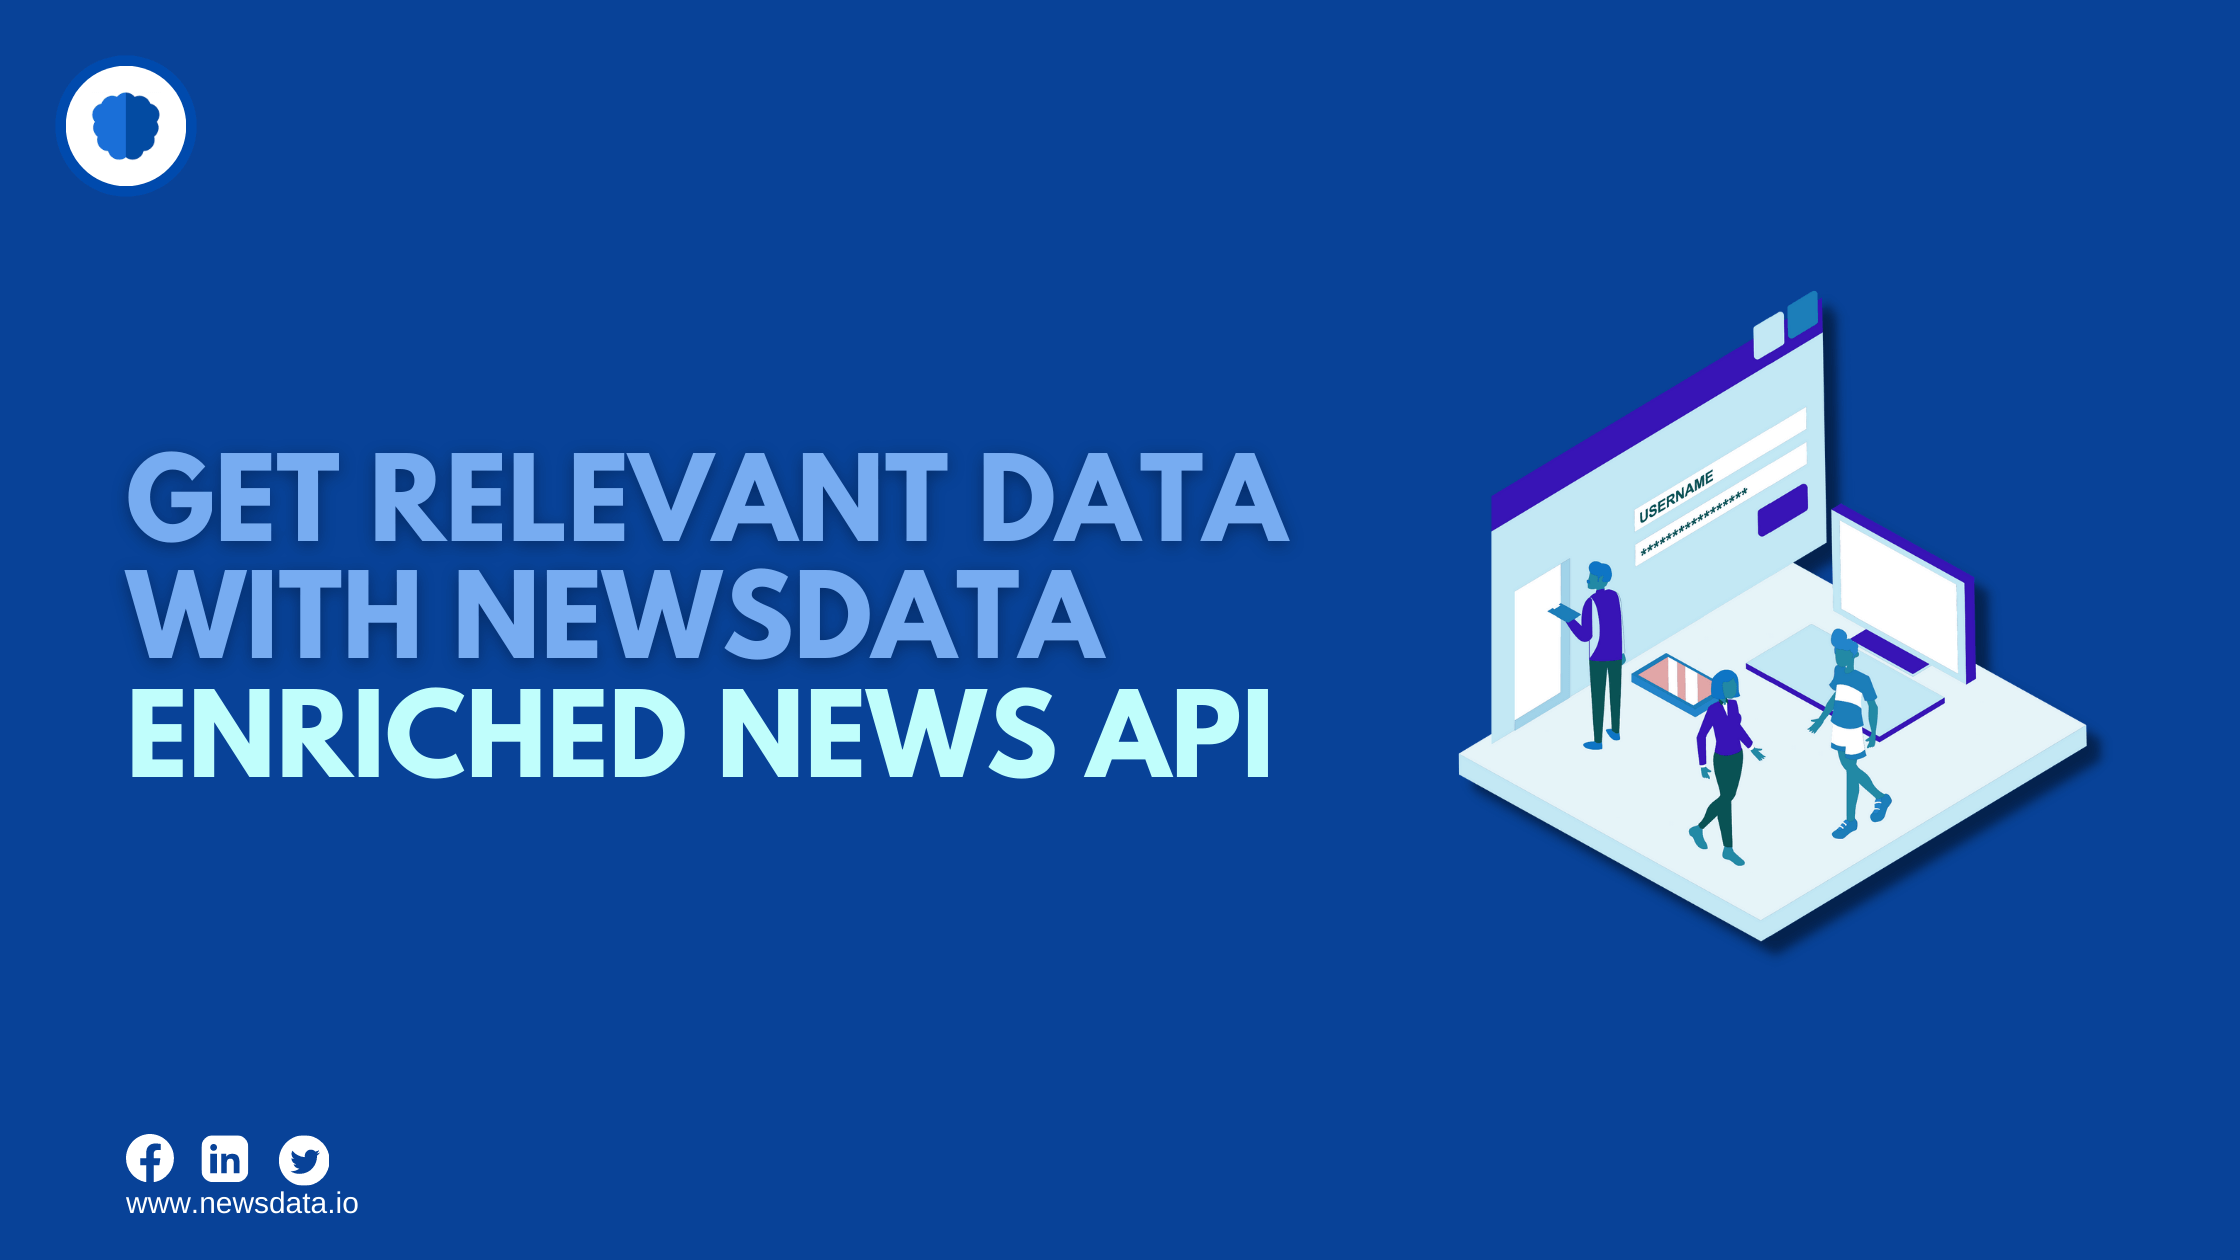 Get Relevant Data With Newsdata Enriched News API